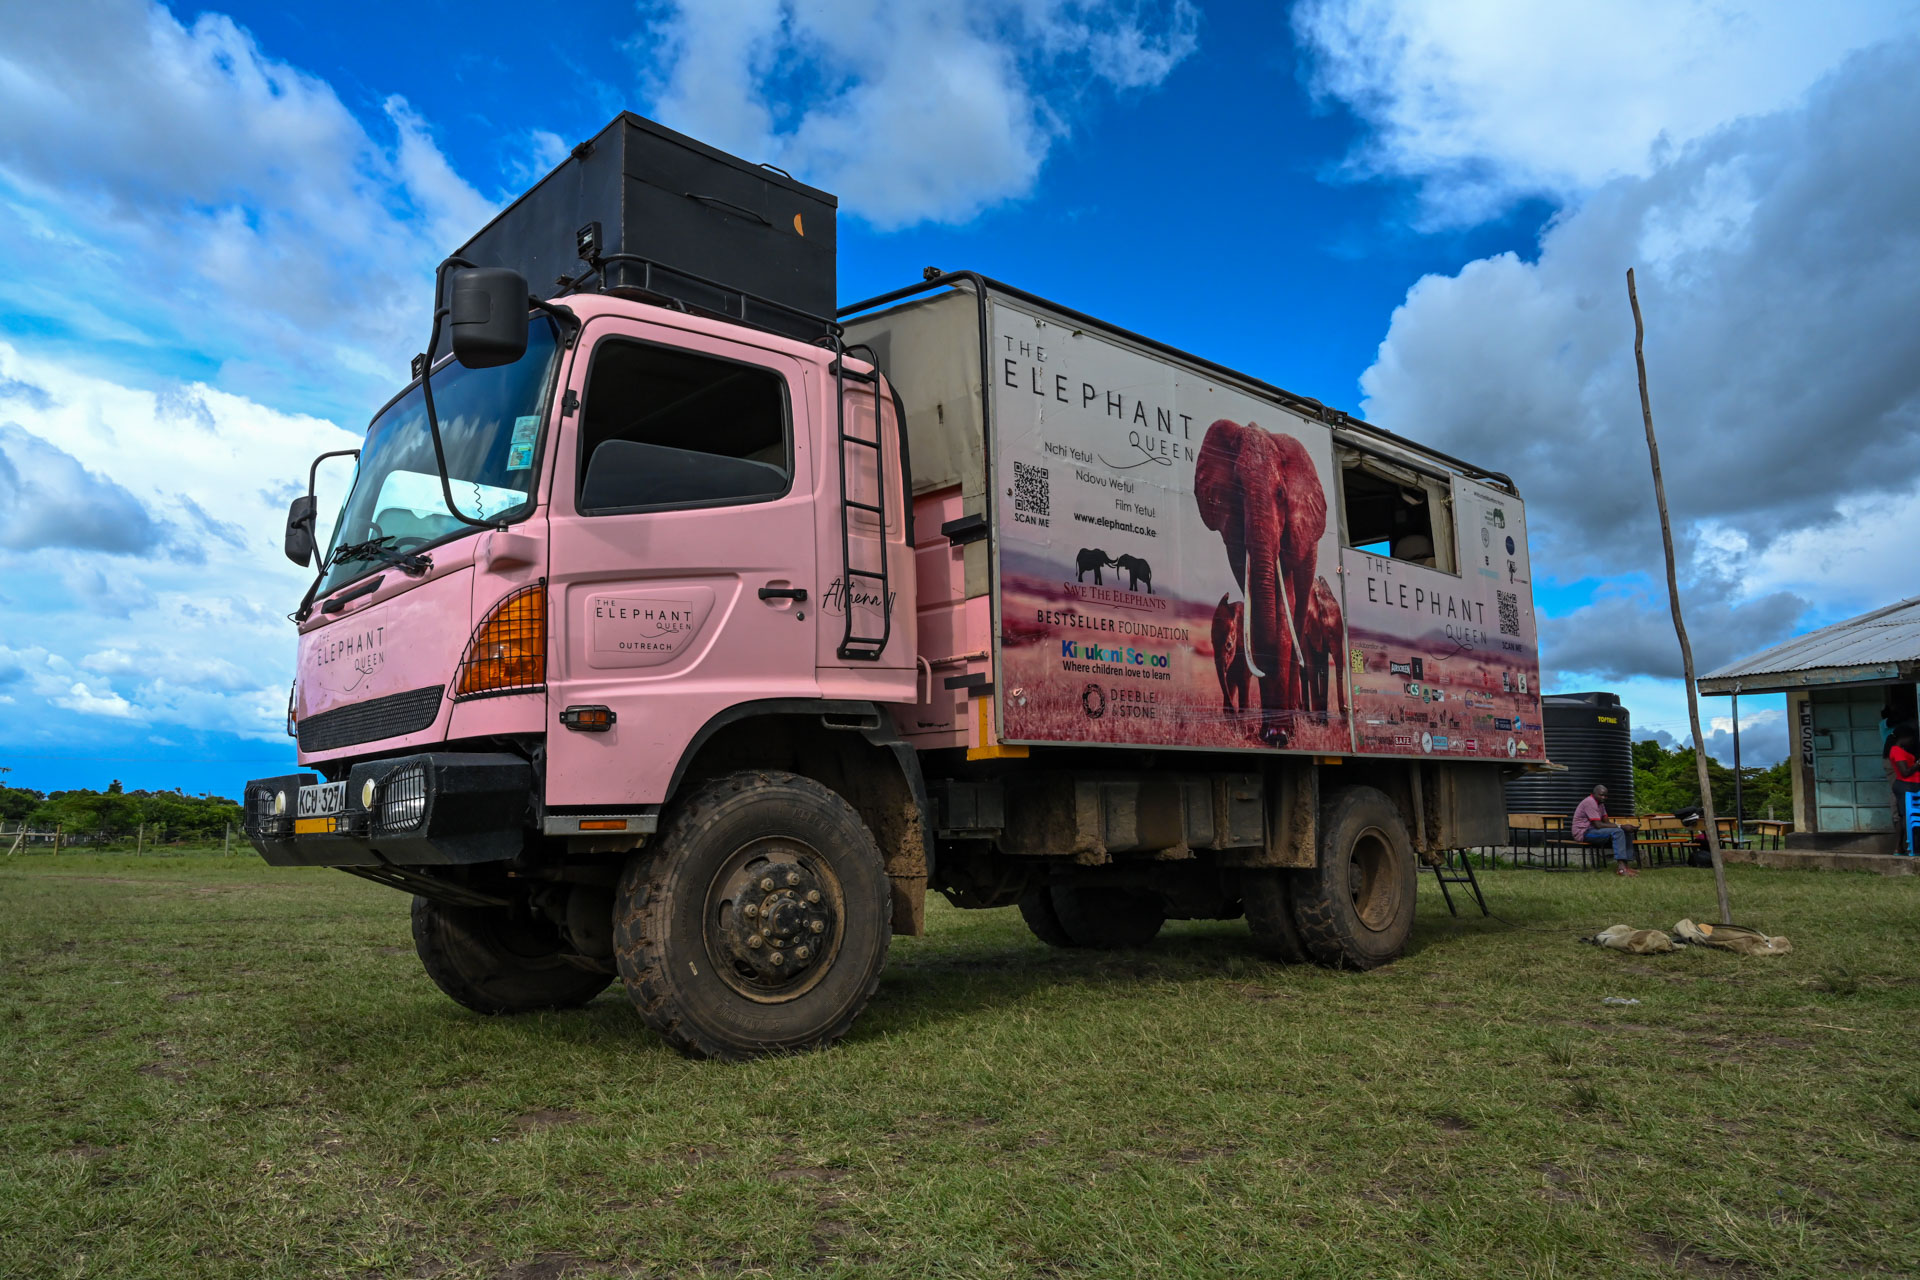 A movie cinema, library and theatre on 4x4 wheels 